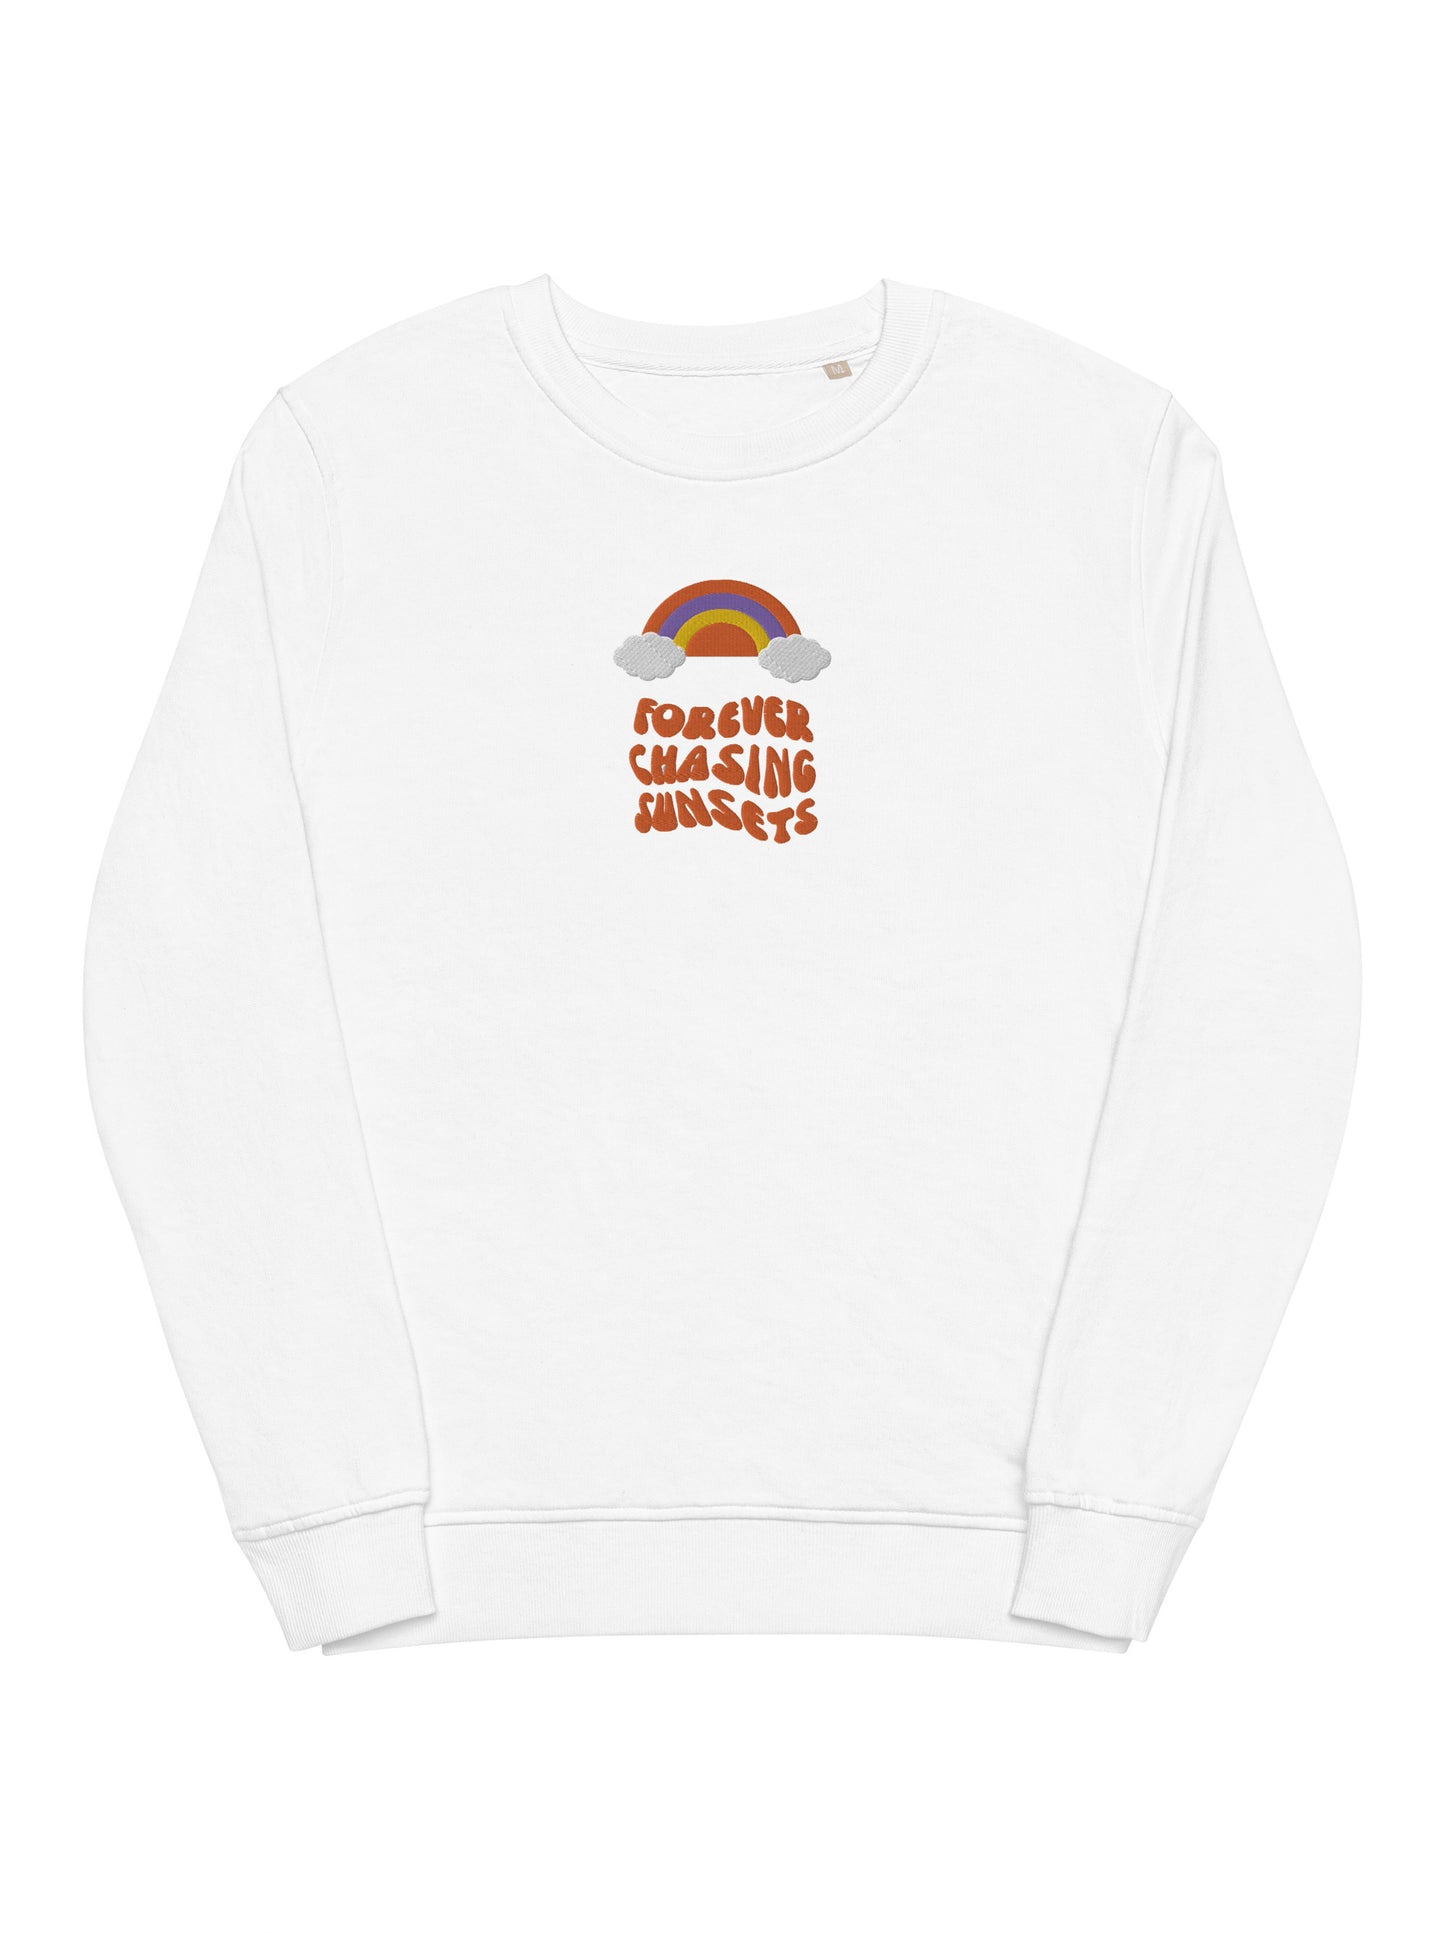 Amii Angel Classic Collection : Forever Chasing Sunsets Hight Quality Embroidered Logo (Organic Cotton)